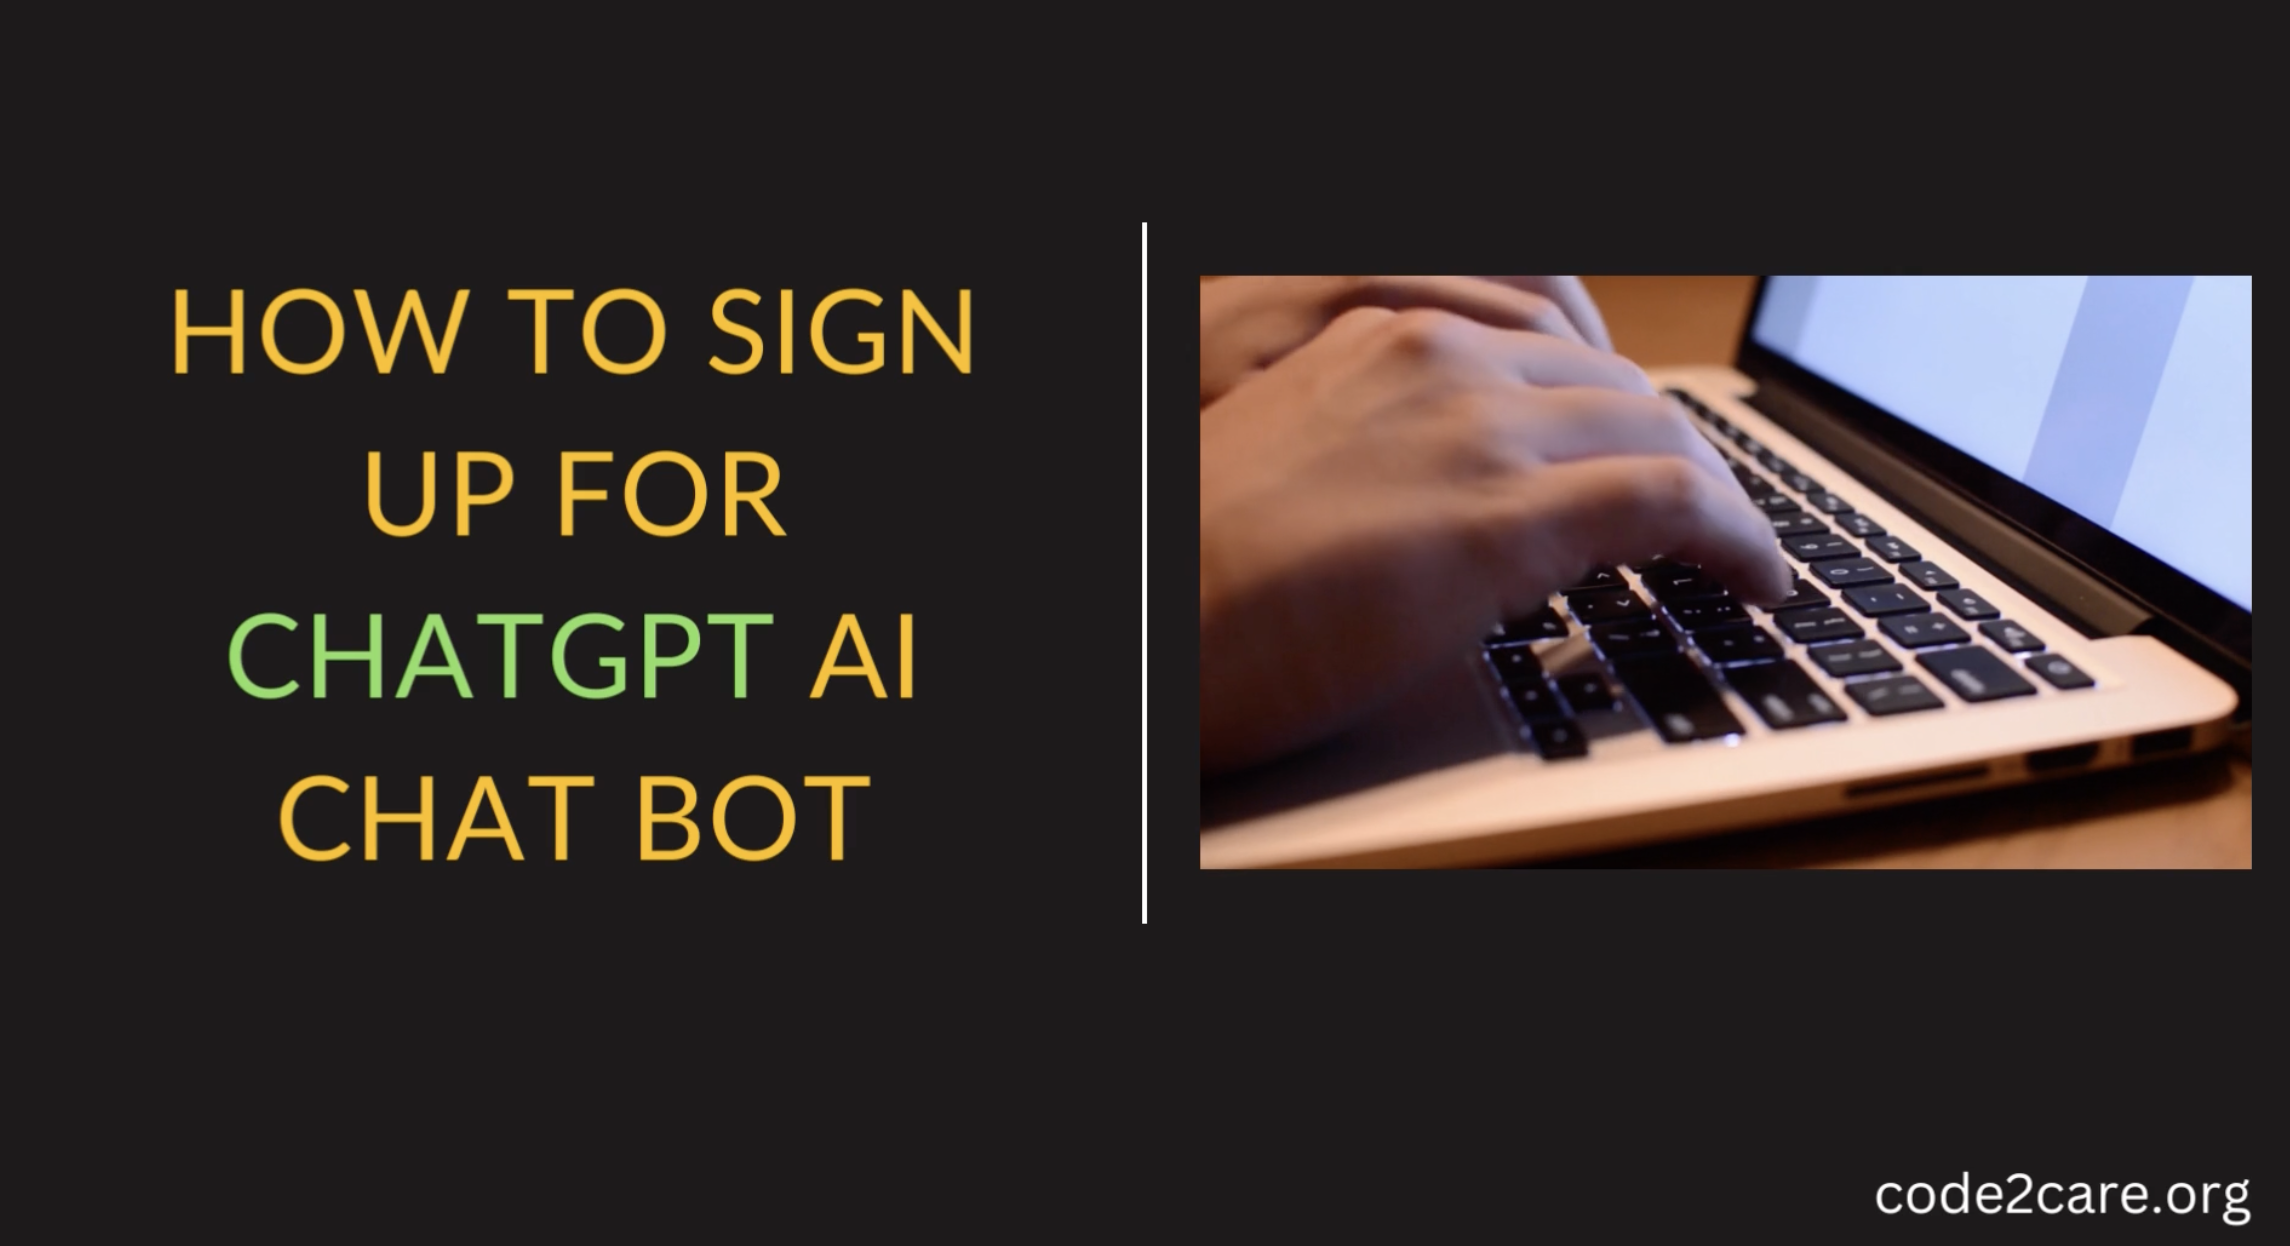 How to Sign Up for ChatGPT AI Chat Bot